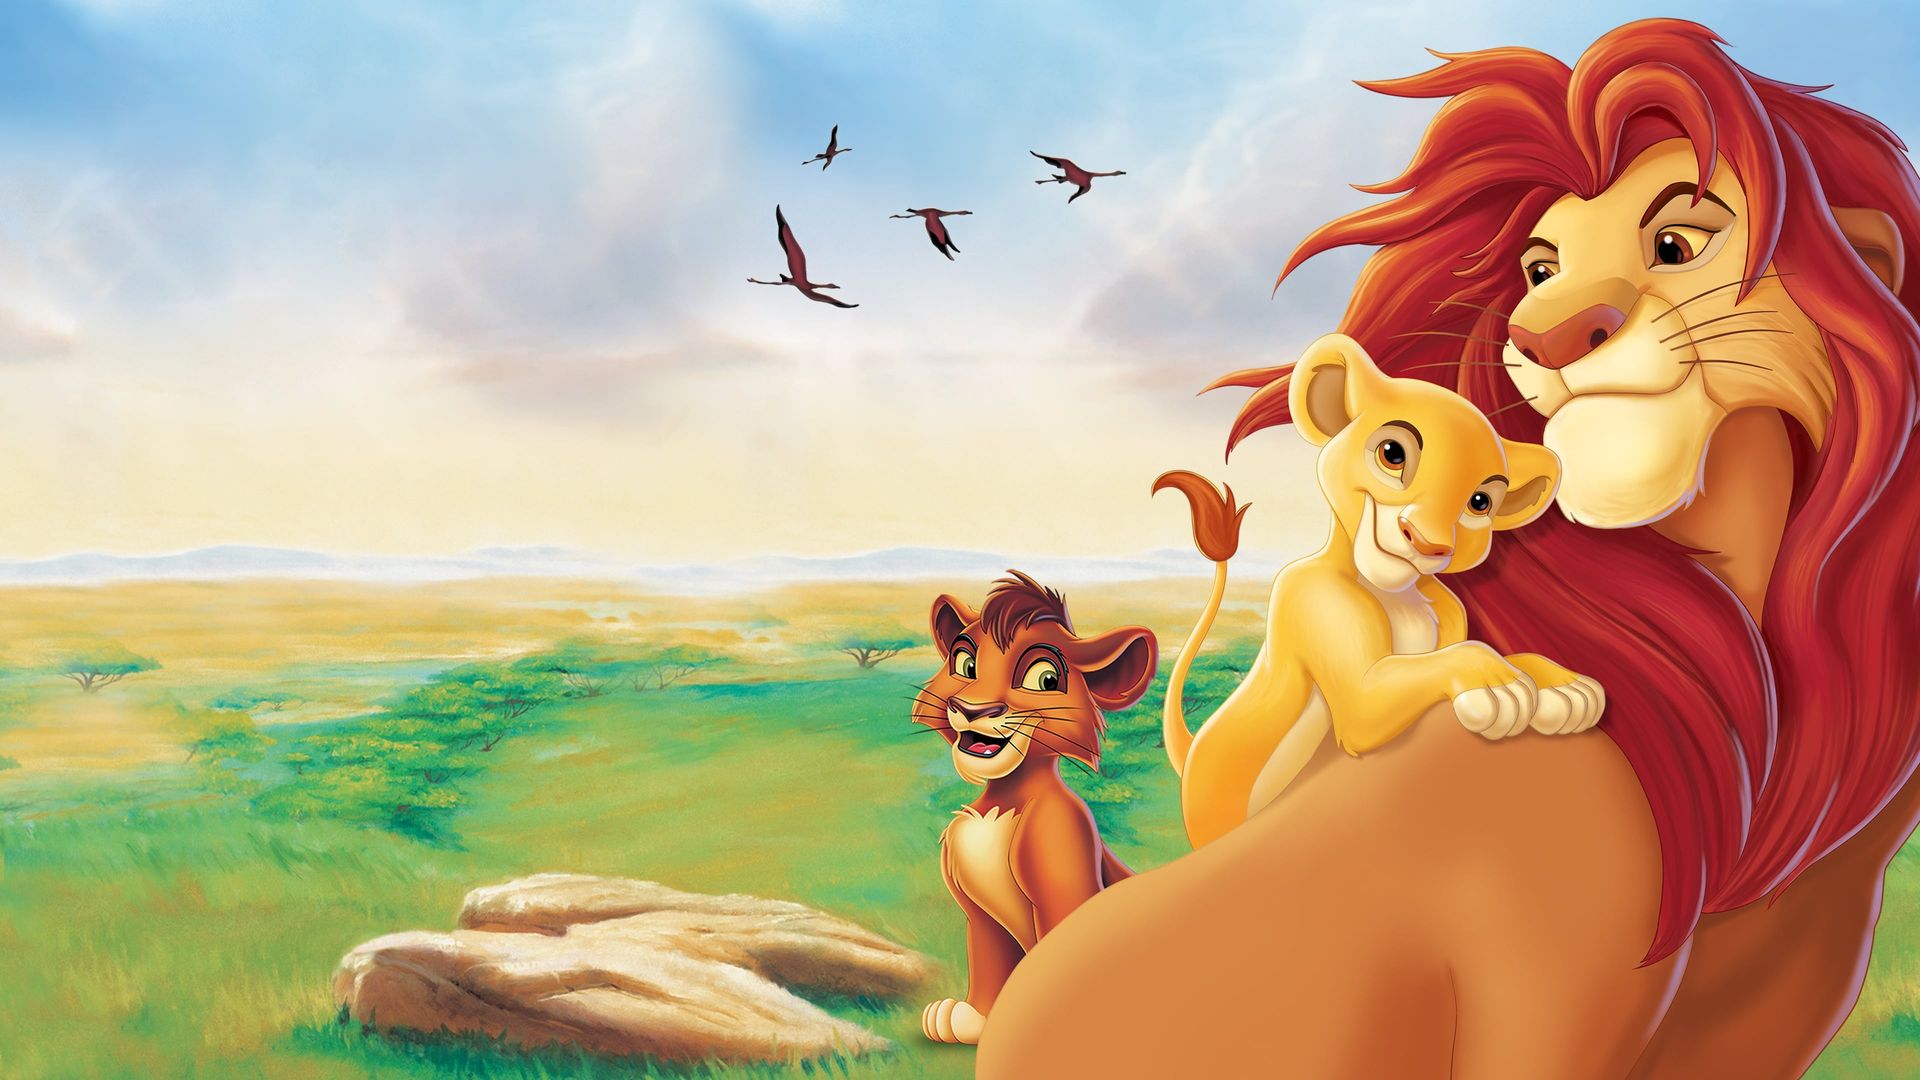 The Lion King II: Simba's Pride (1998) on Disney+ or Streaming Online